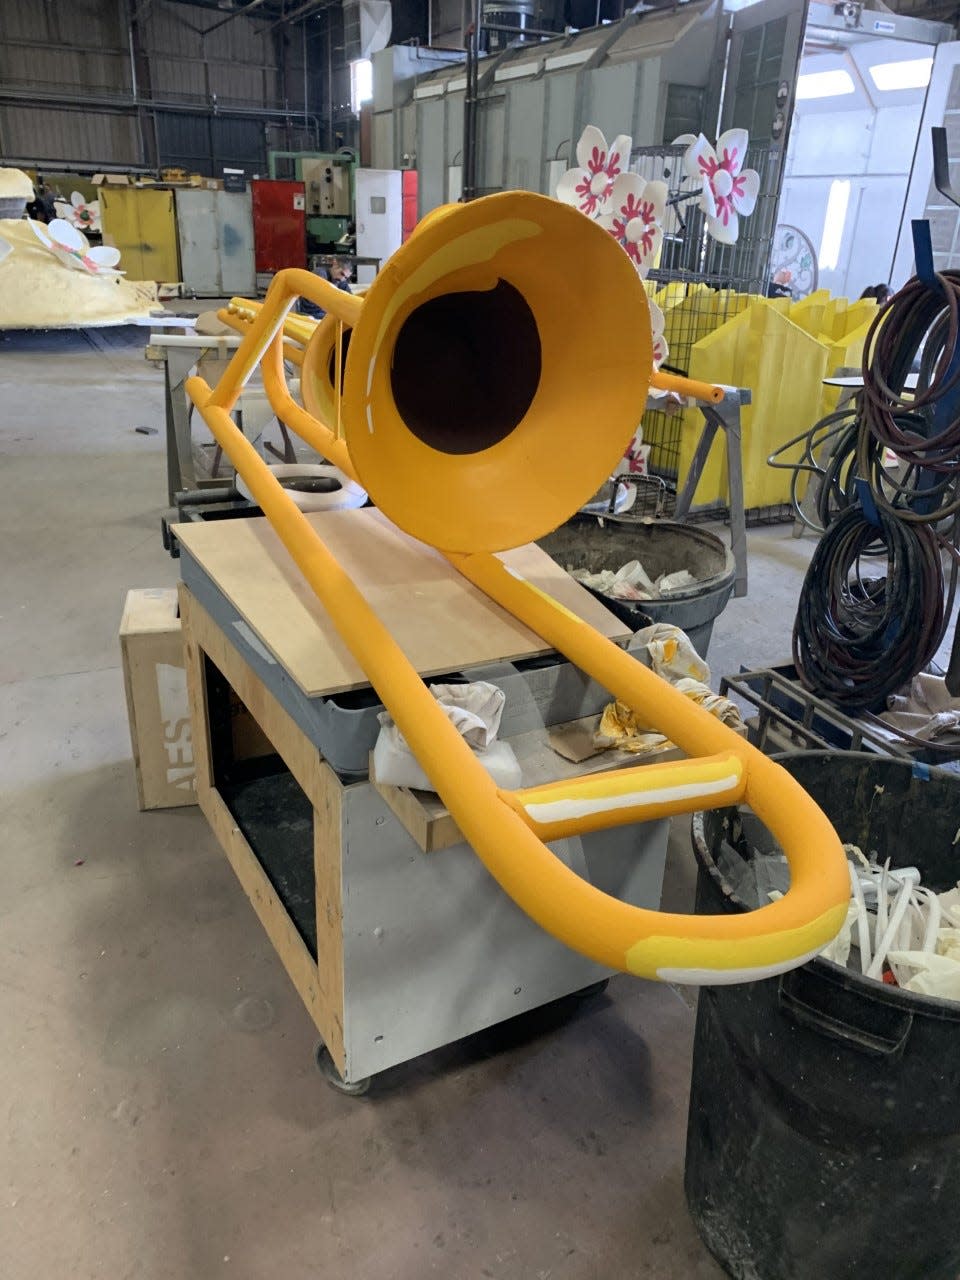 Shown is a trombone that will be part of the Salute America's Band Directors float that is being entered into the 2022 Tournament of Roses Parade by the Michael D. Sewell Memorial Foundation.